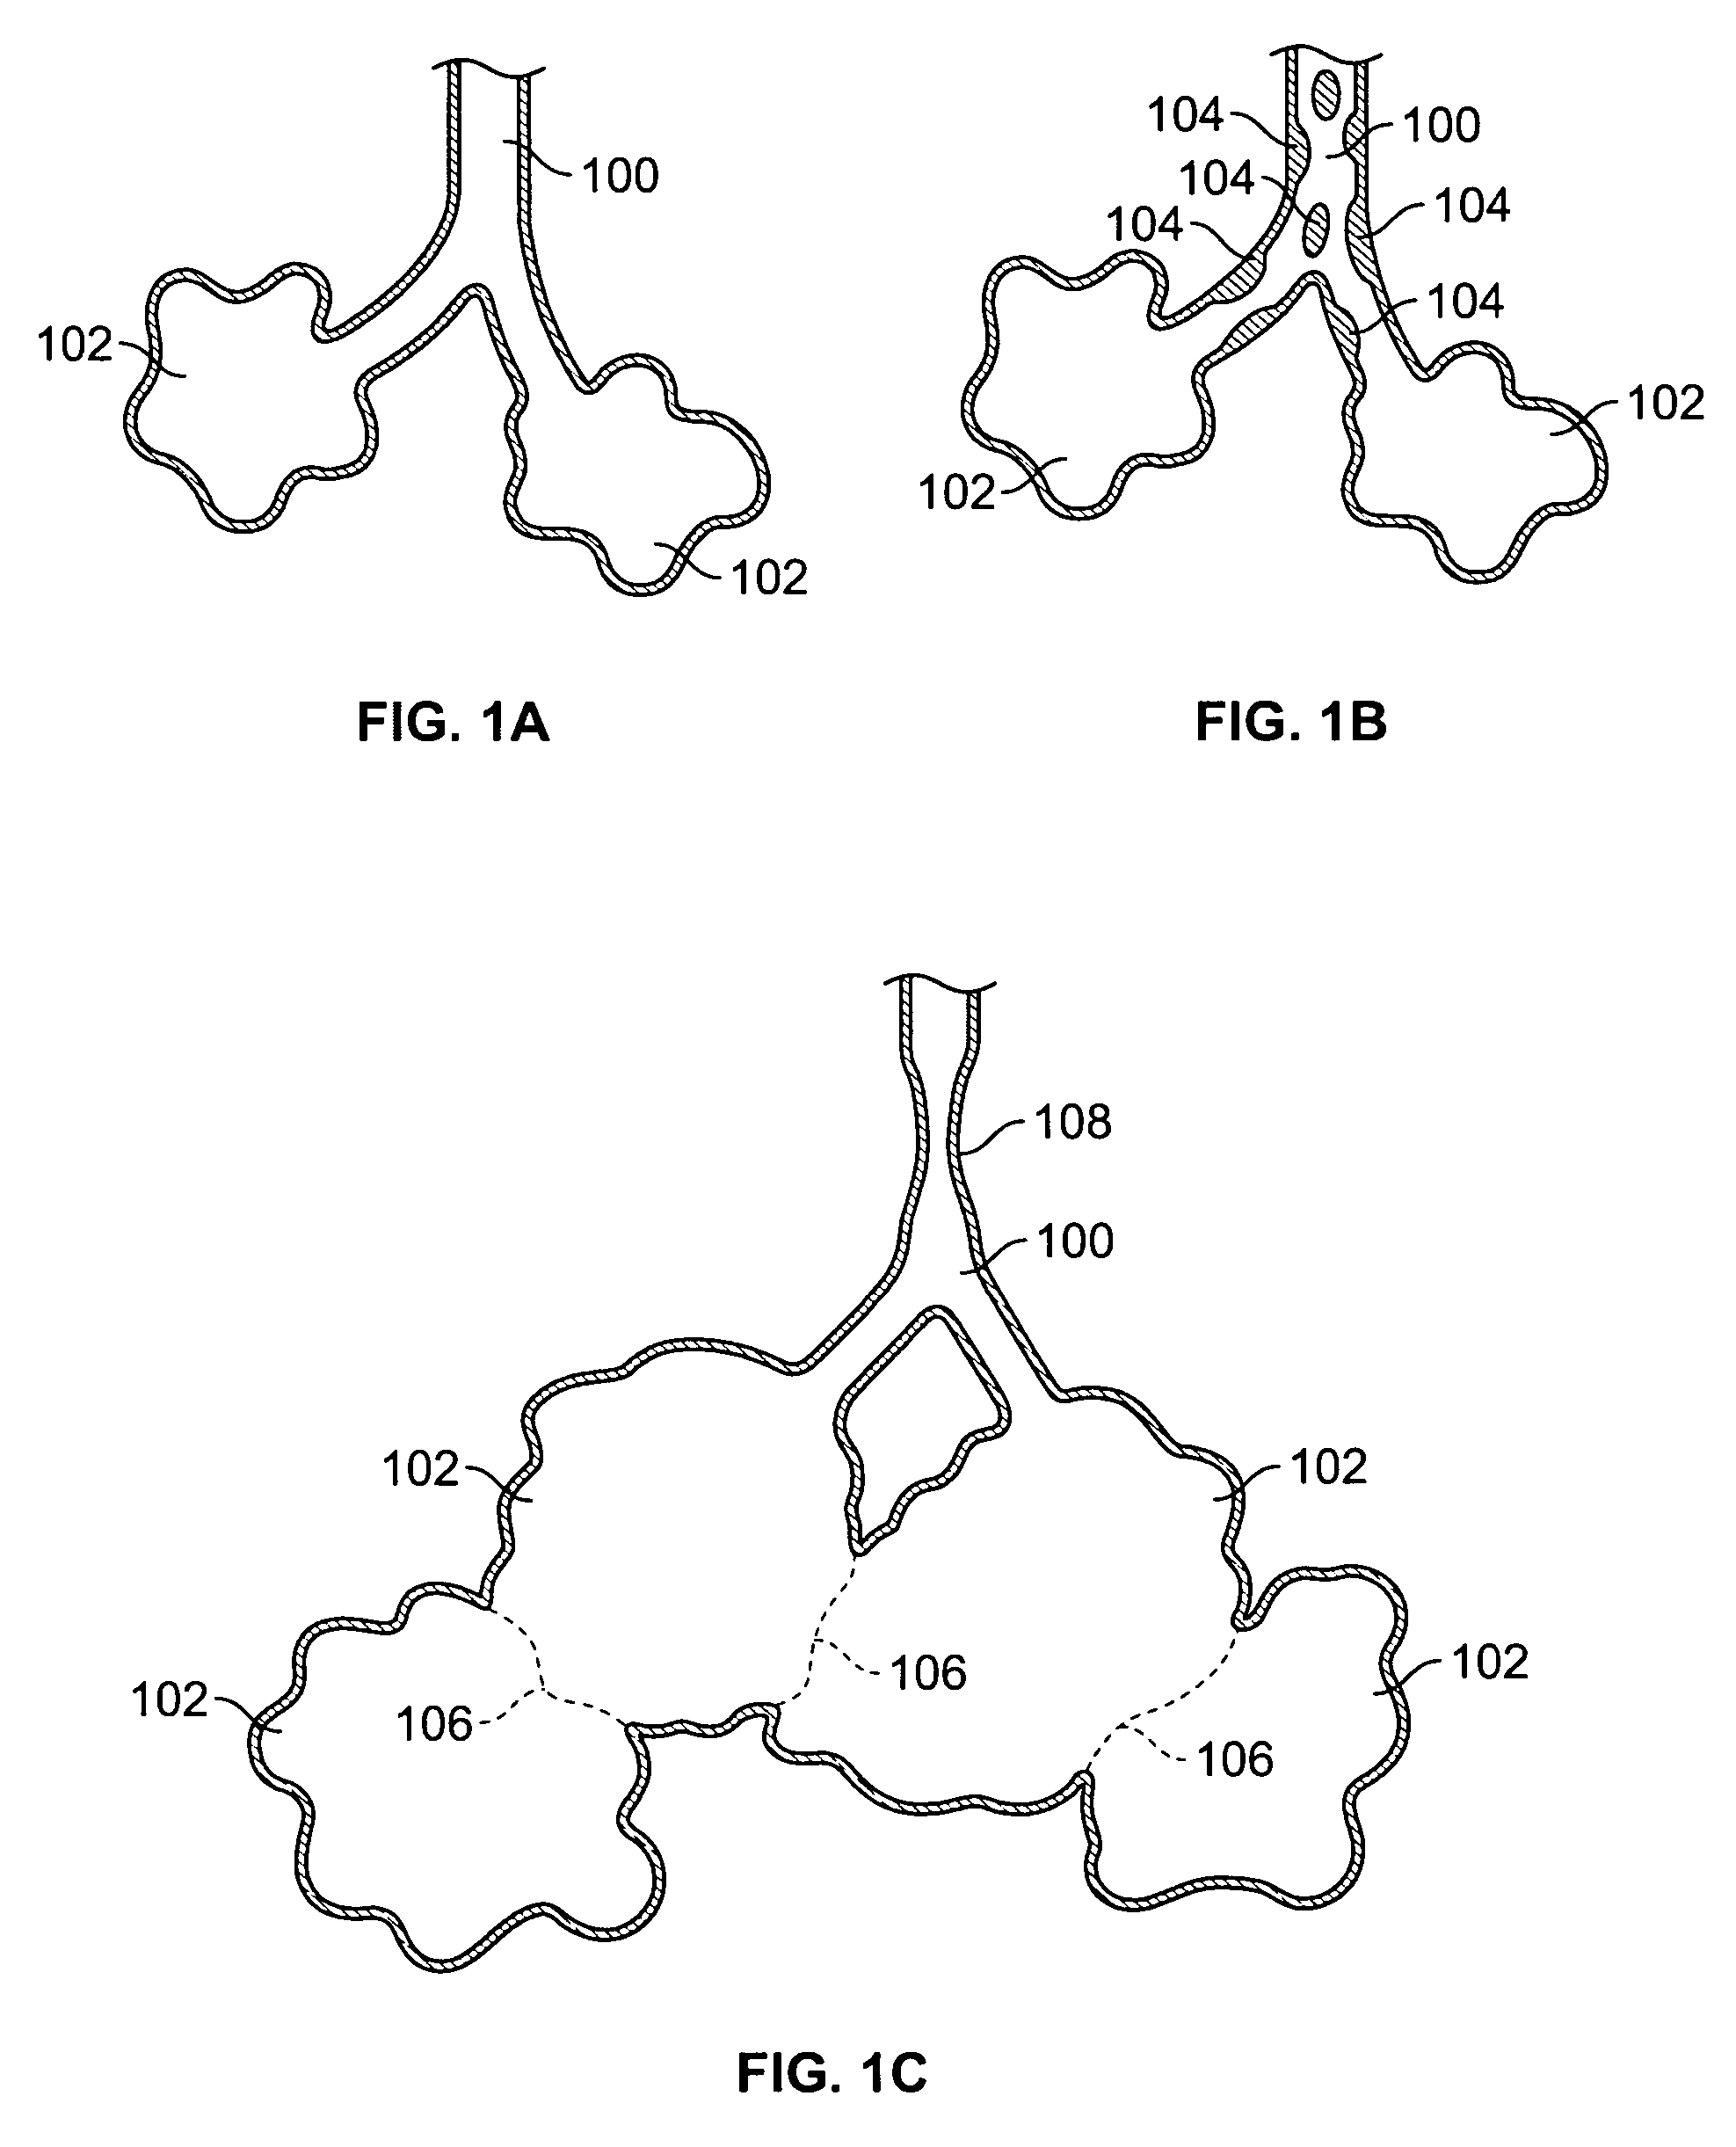 Antiproliferative devices for maintaining patency of surgically created channels in a body organ